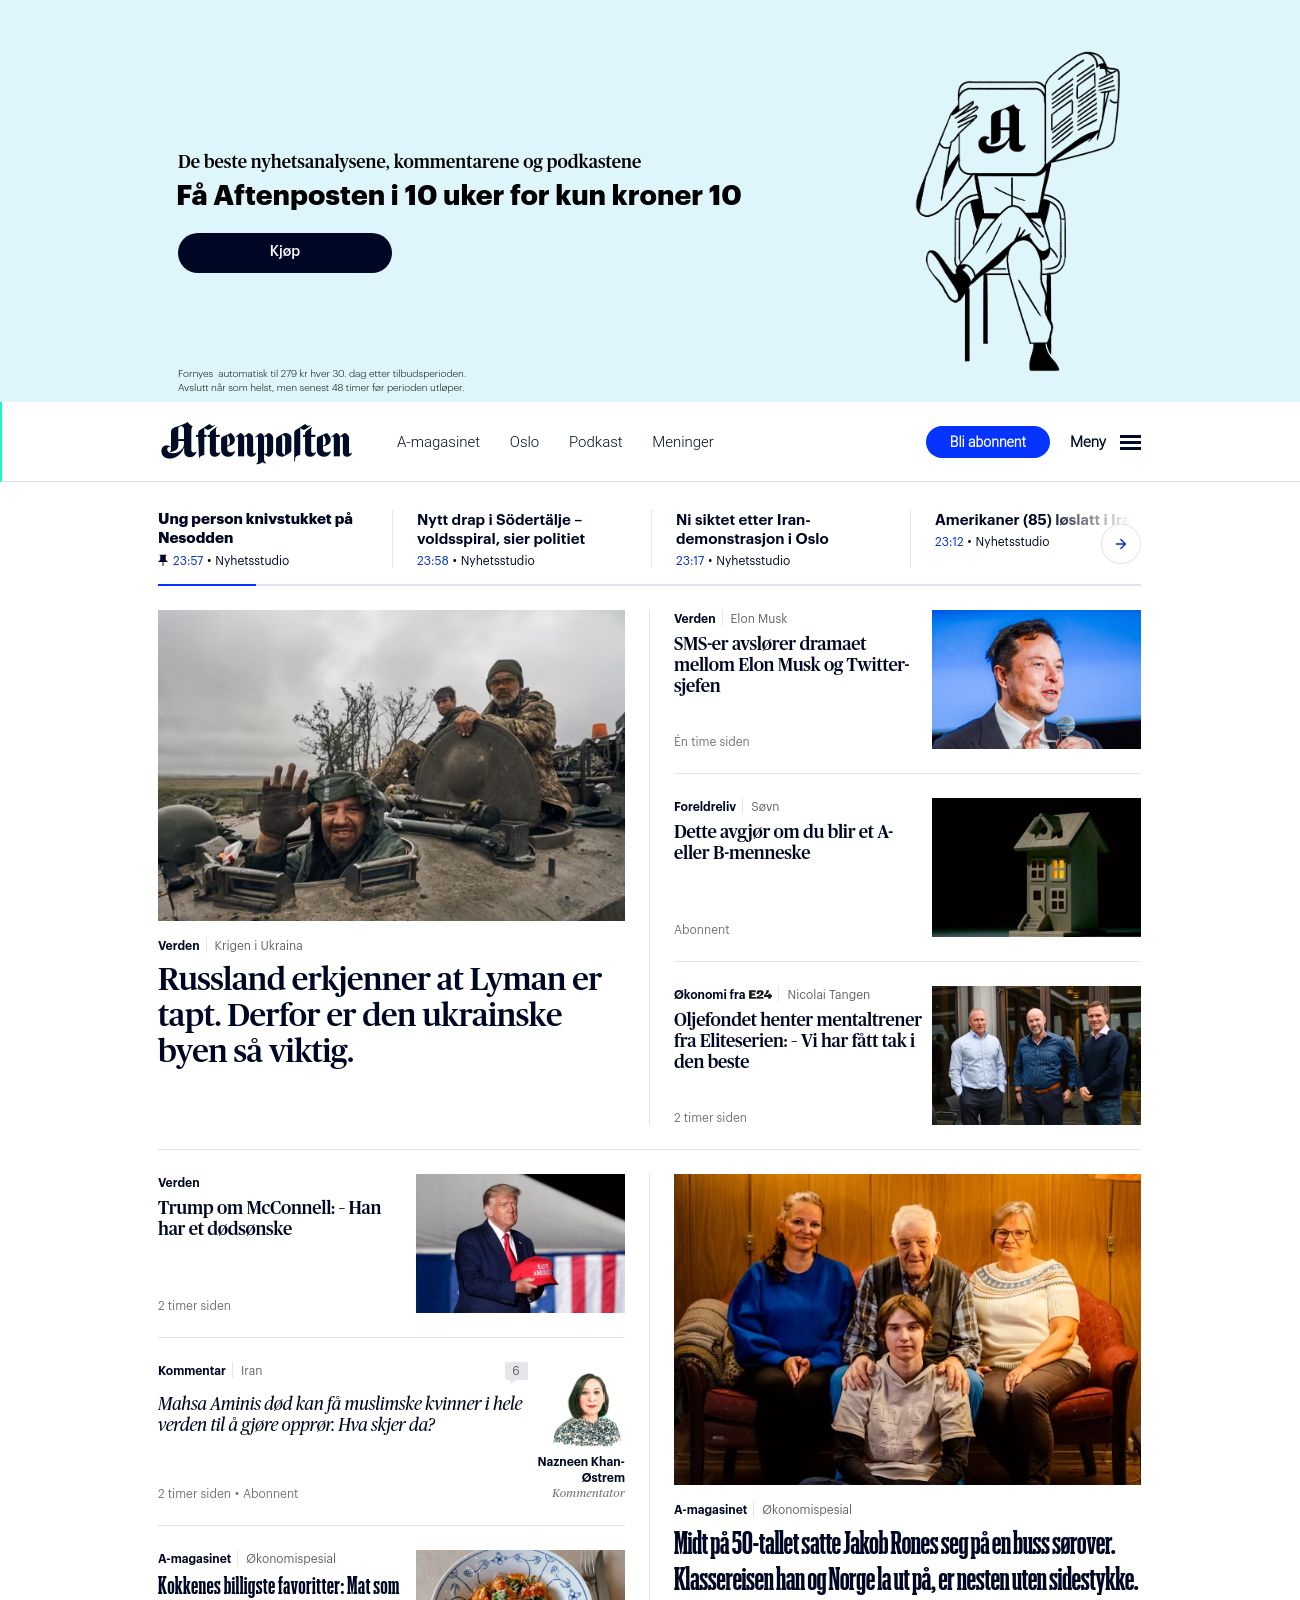 Aftenposten at 2022-10-02 00:54:57+02:00 local time